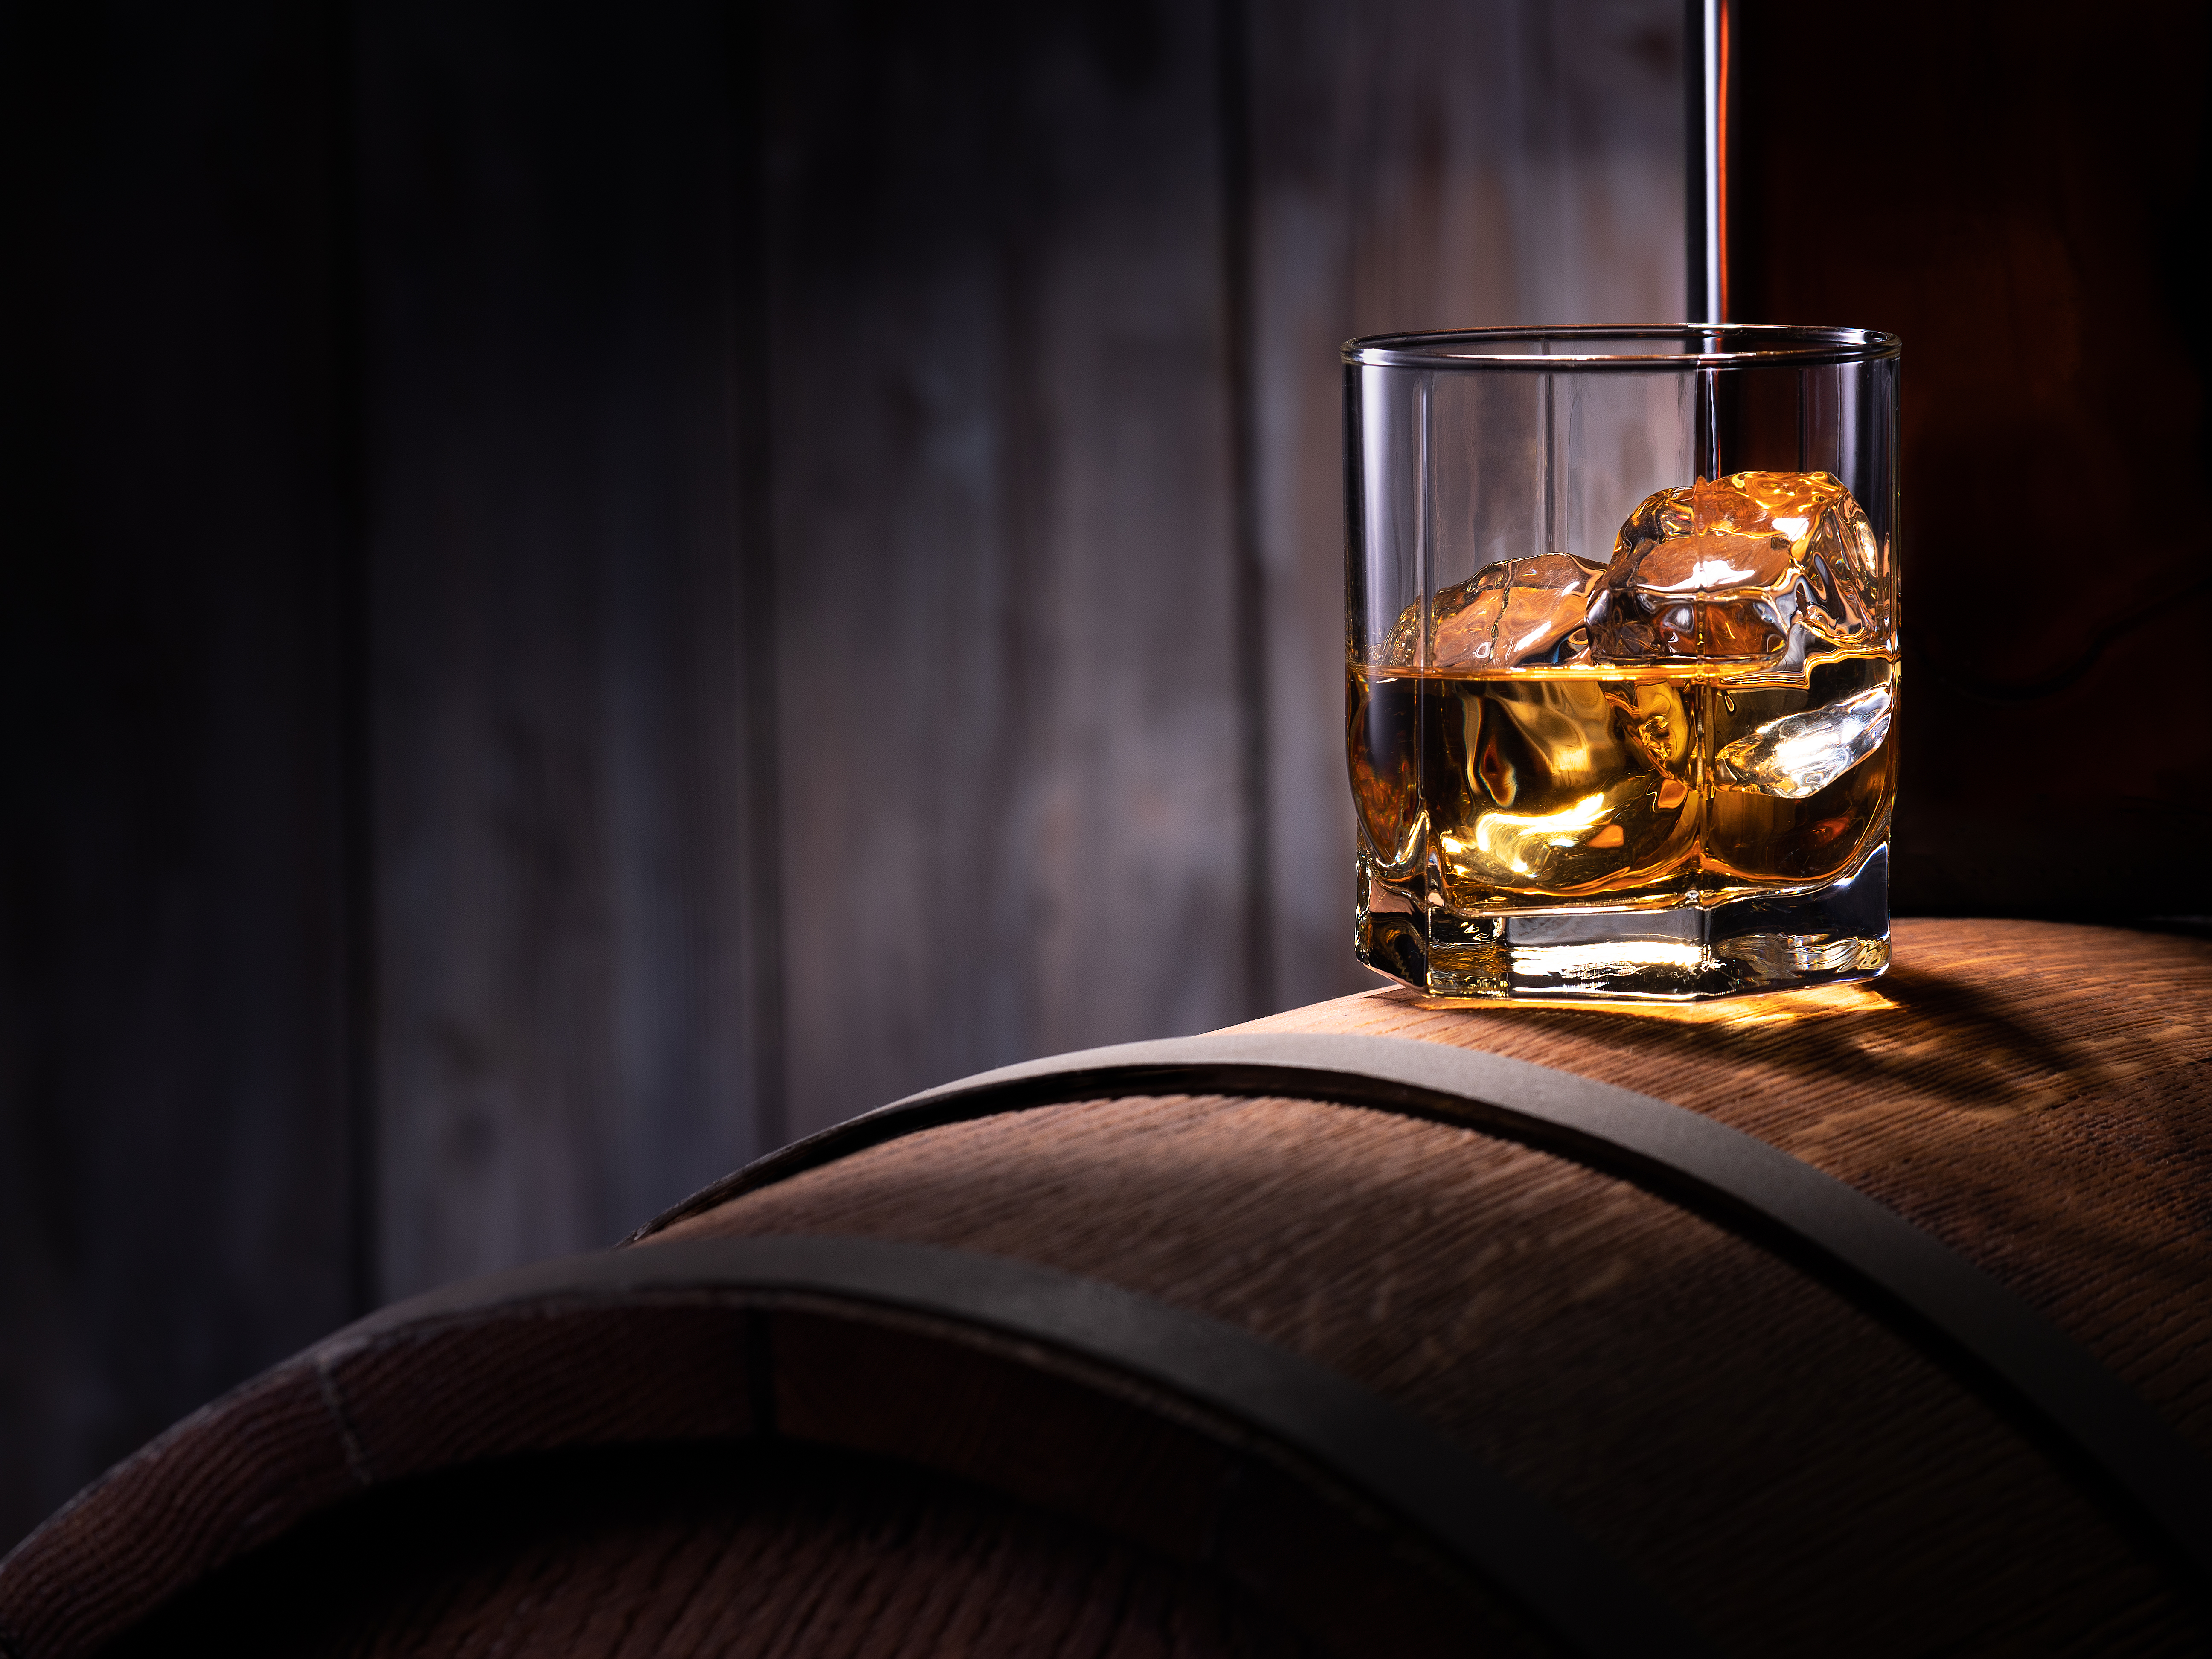 Glass,Of,Whiskey,With,Ice,Cubes,On,The,Wooden,Barrel